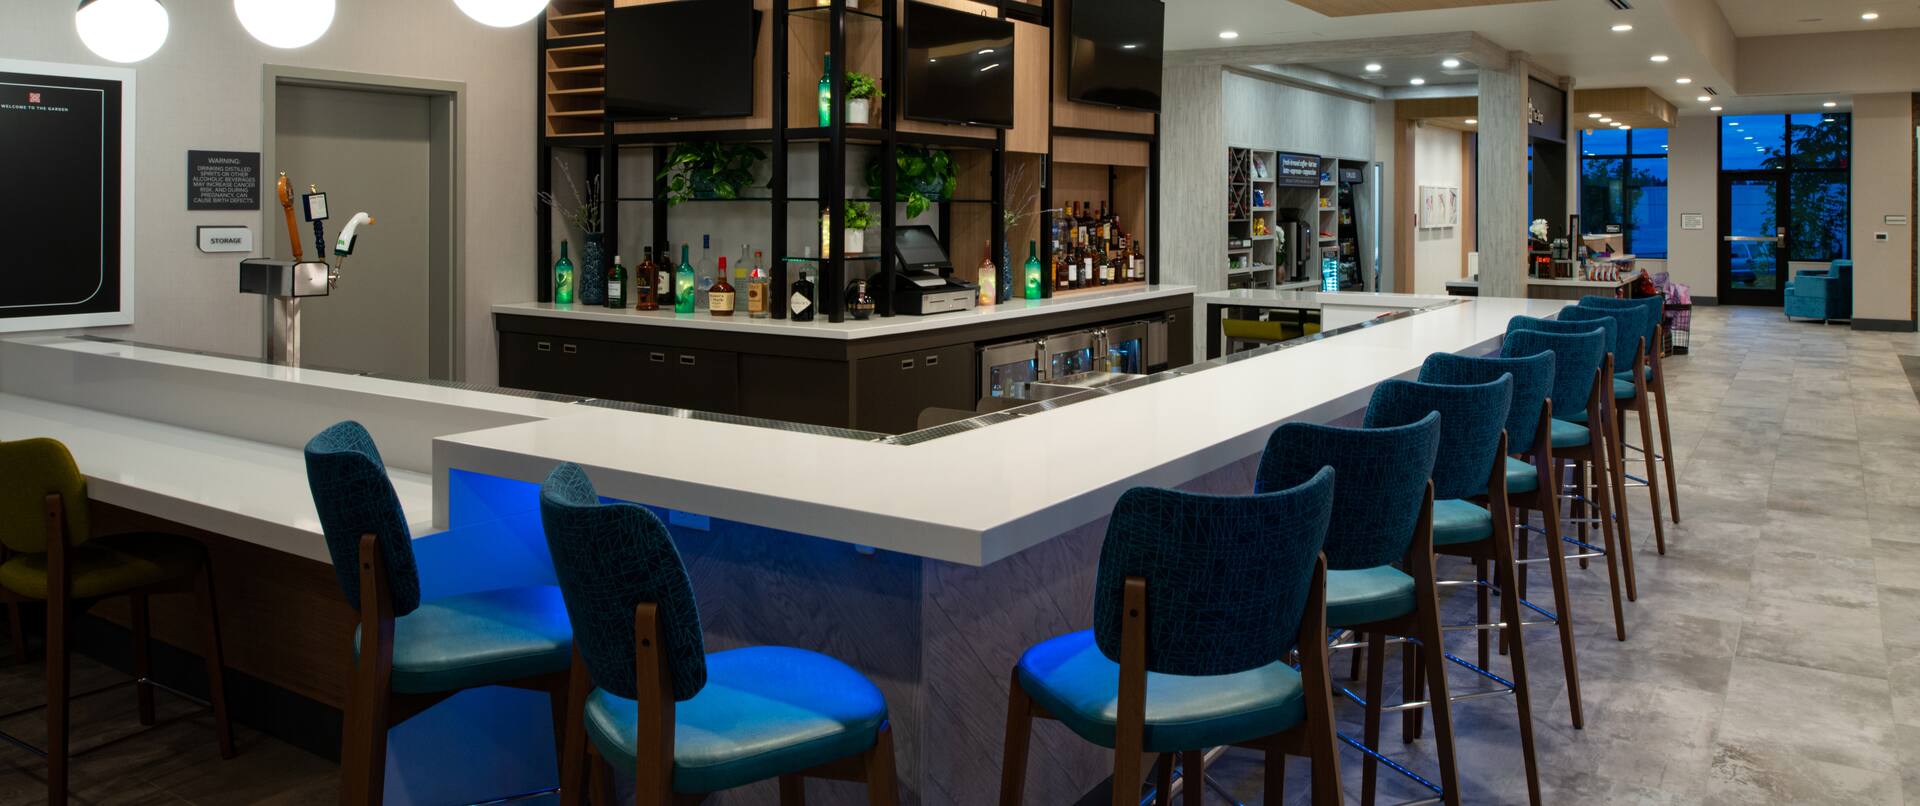 Bar area with stools